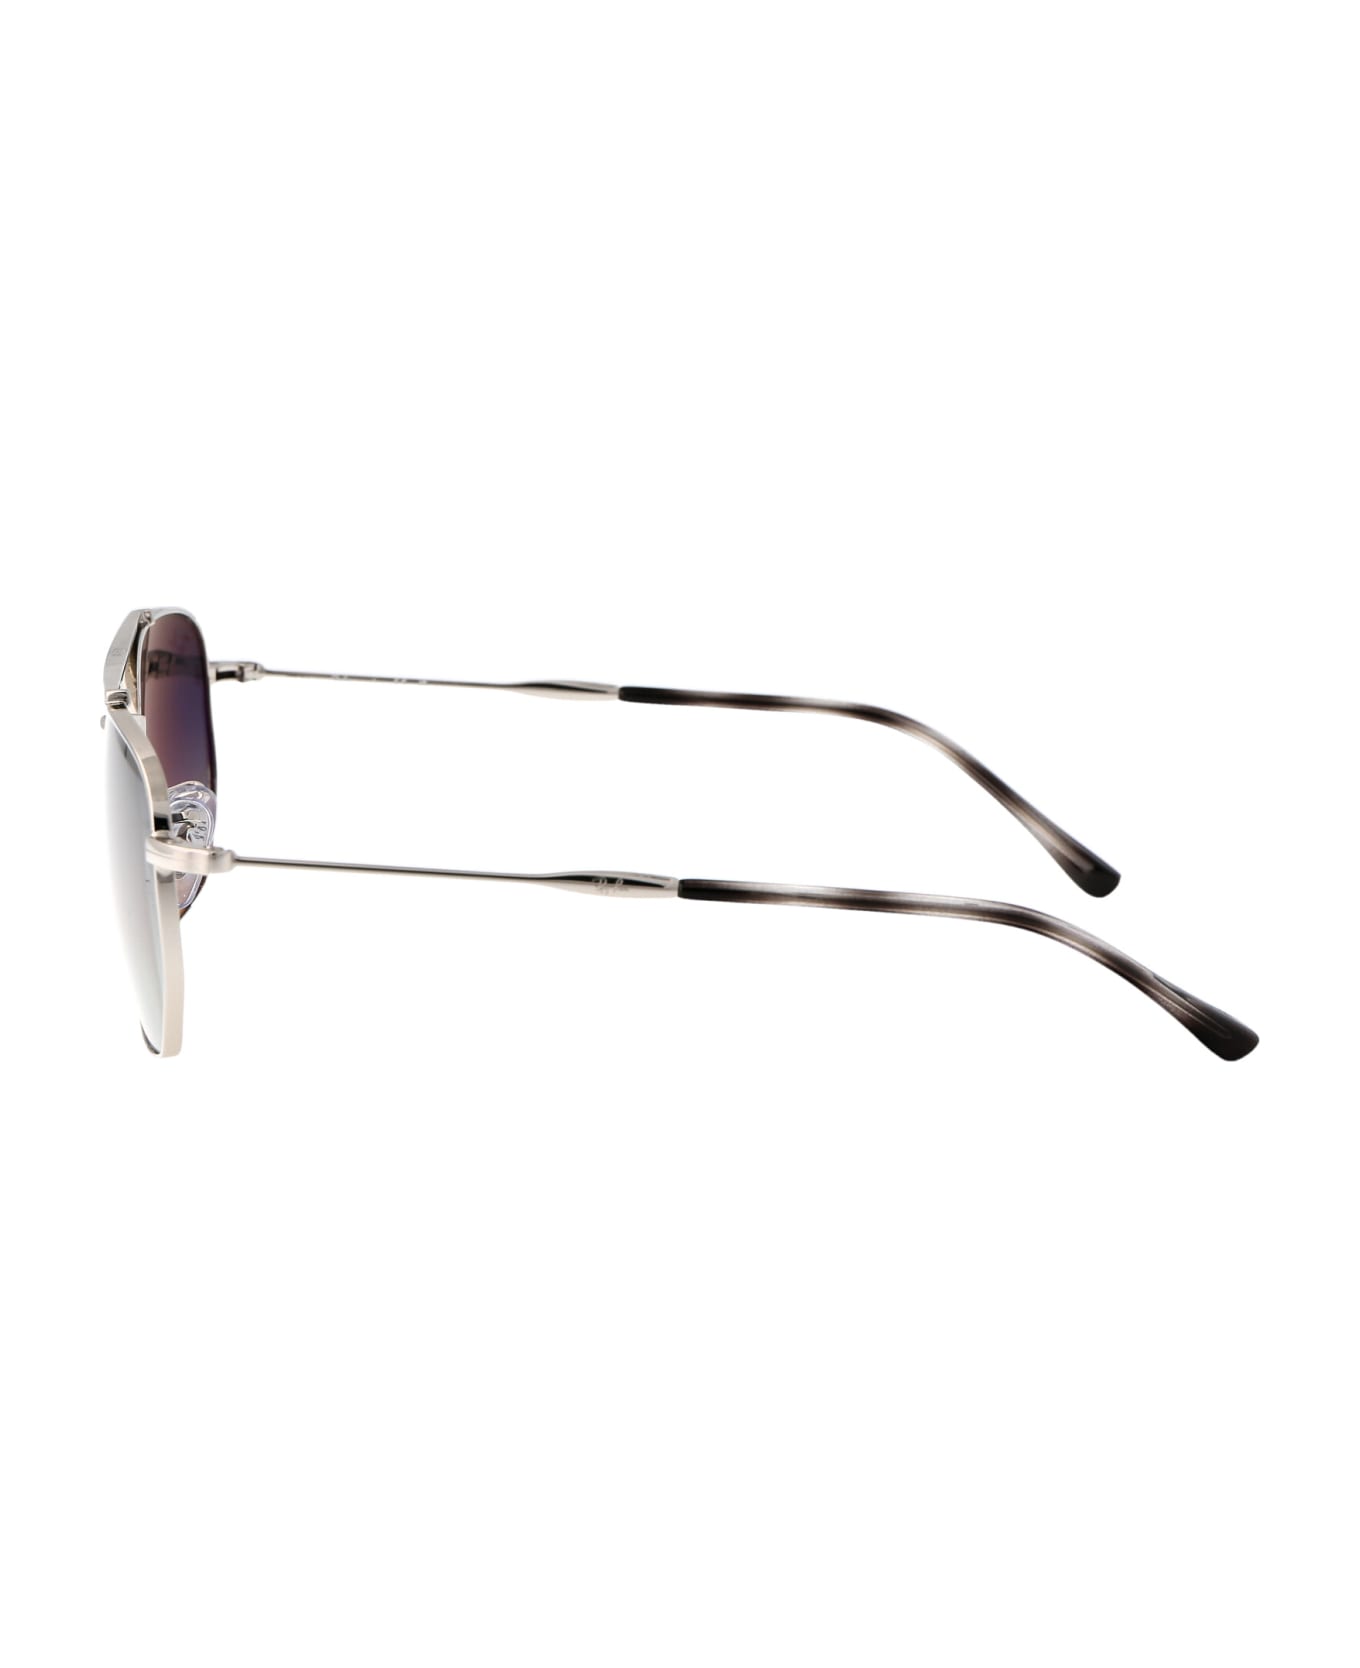 Ray-Ban 0rb3707 Sunglasses - 003/71 SILVER